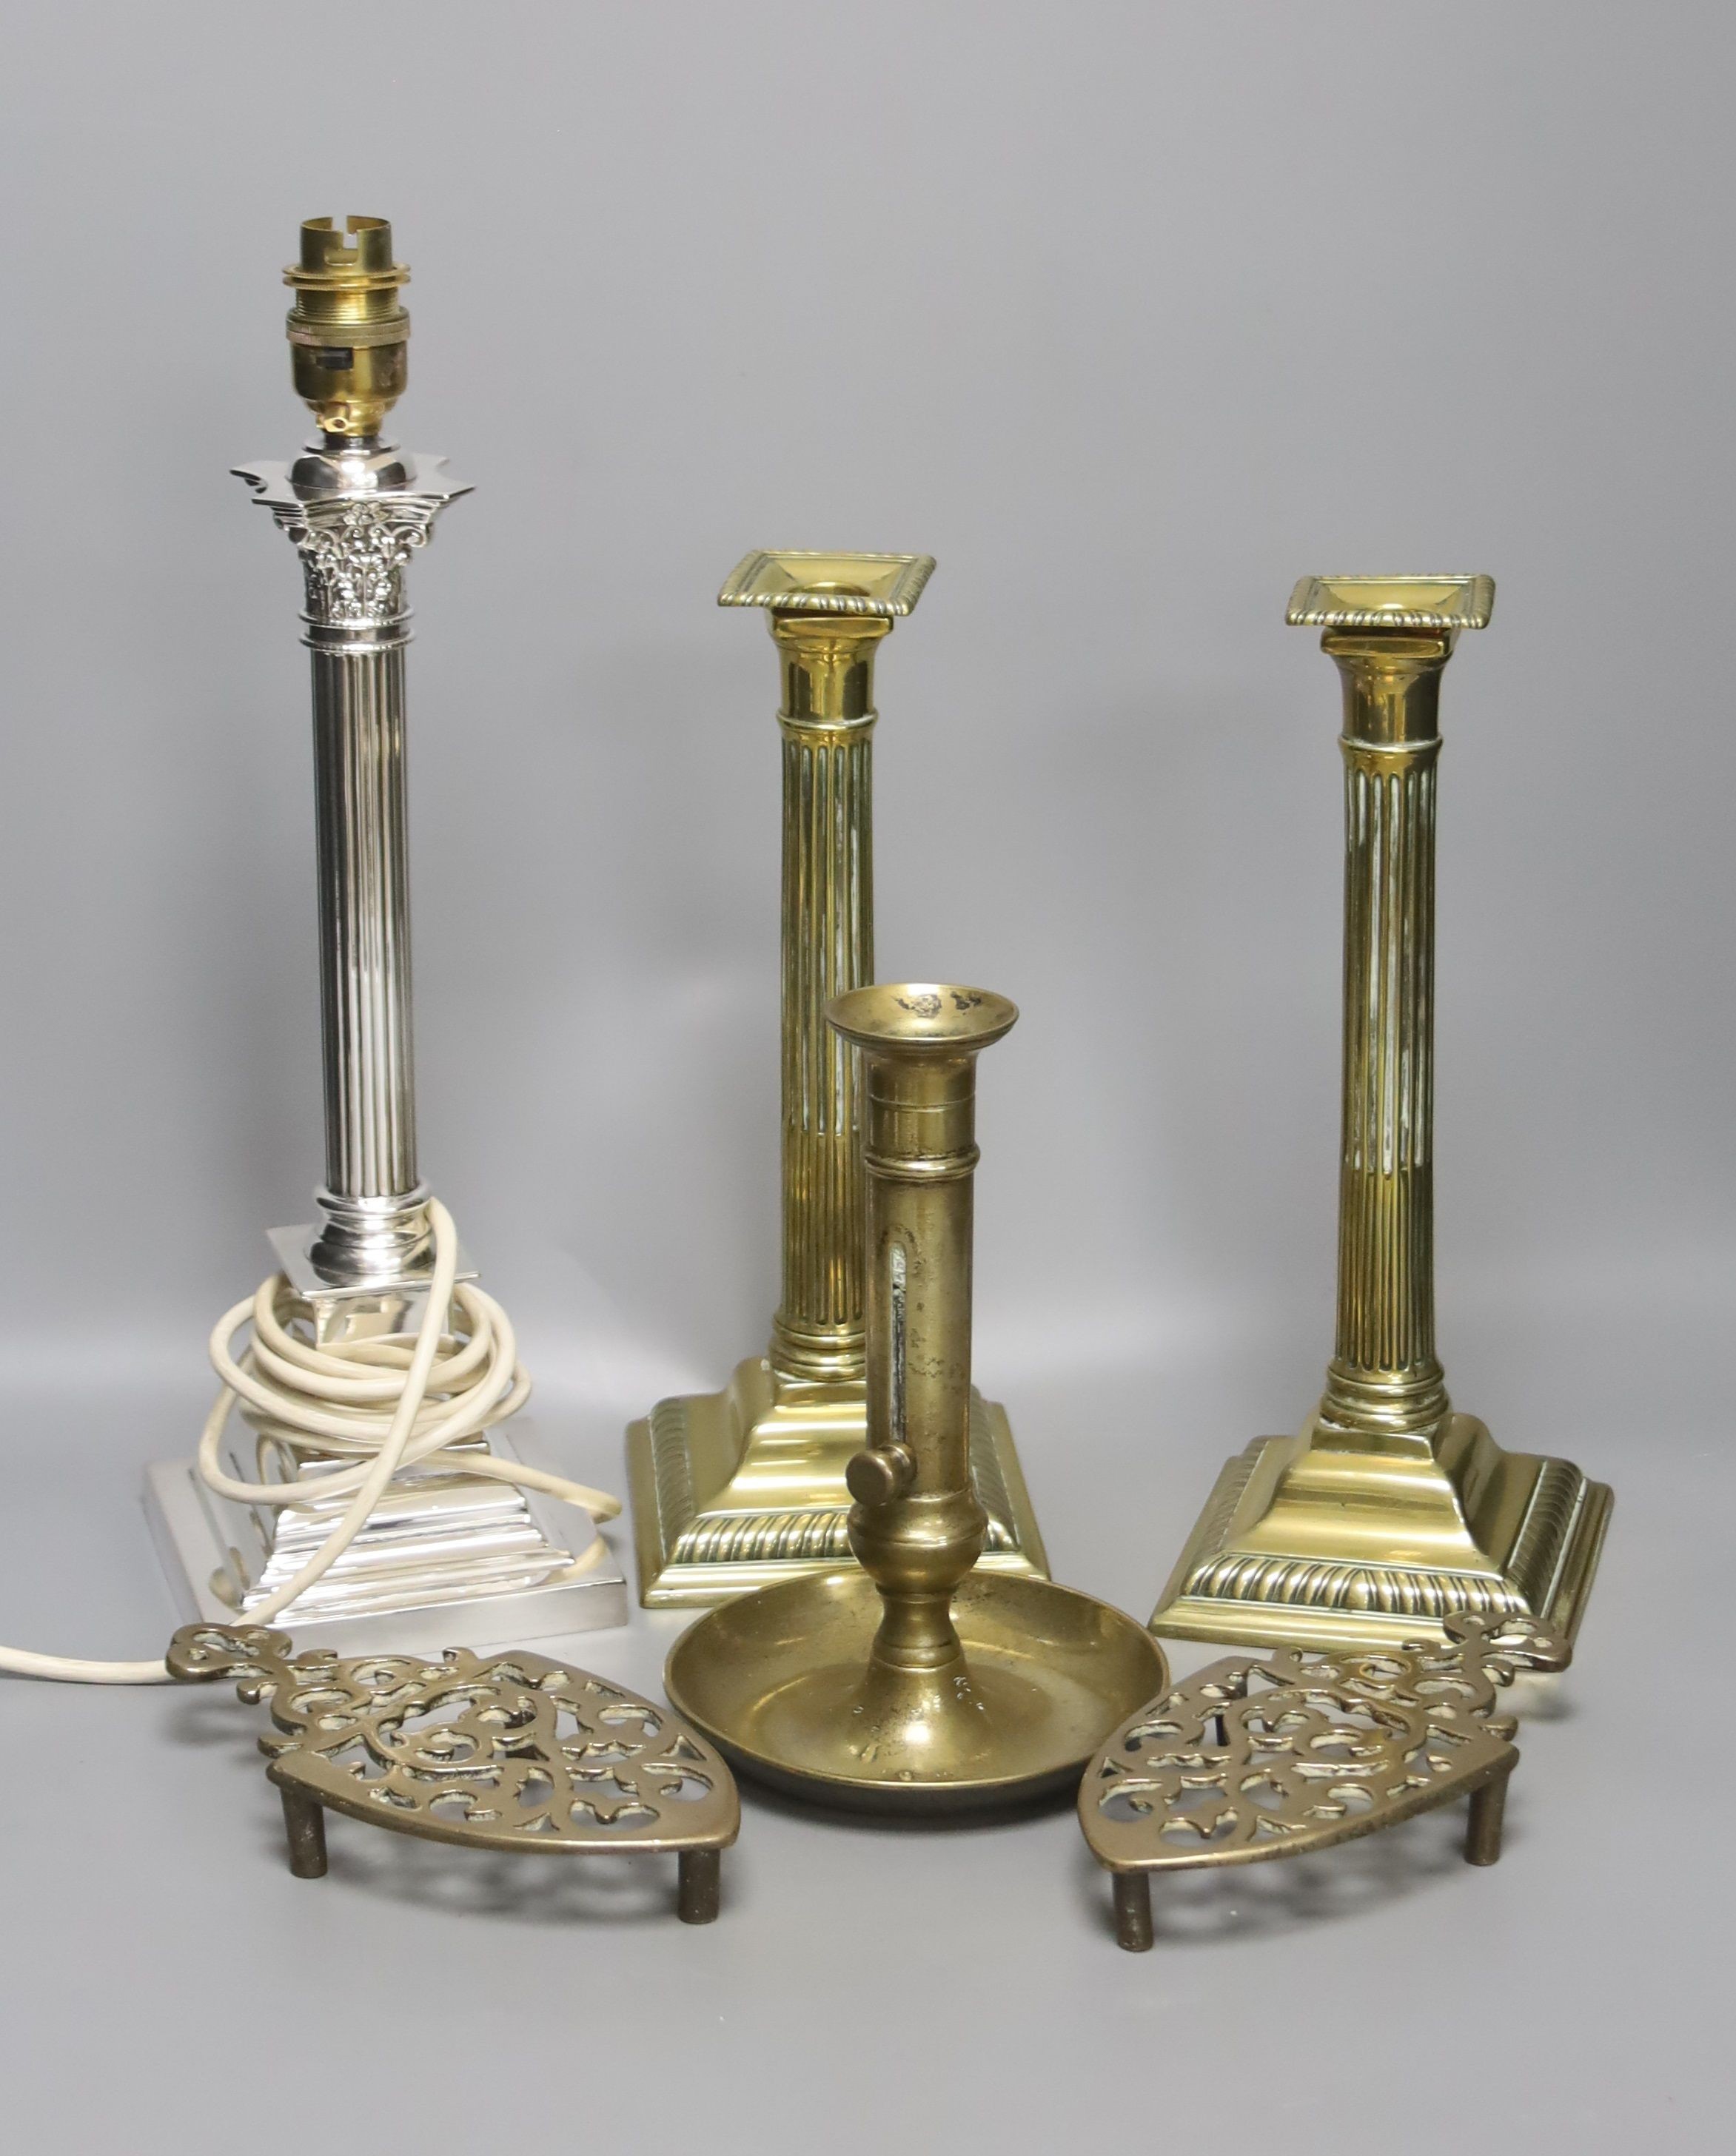 A pair of brass candlesticks, a telescopic candlestick and a silver plated table lamp base